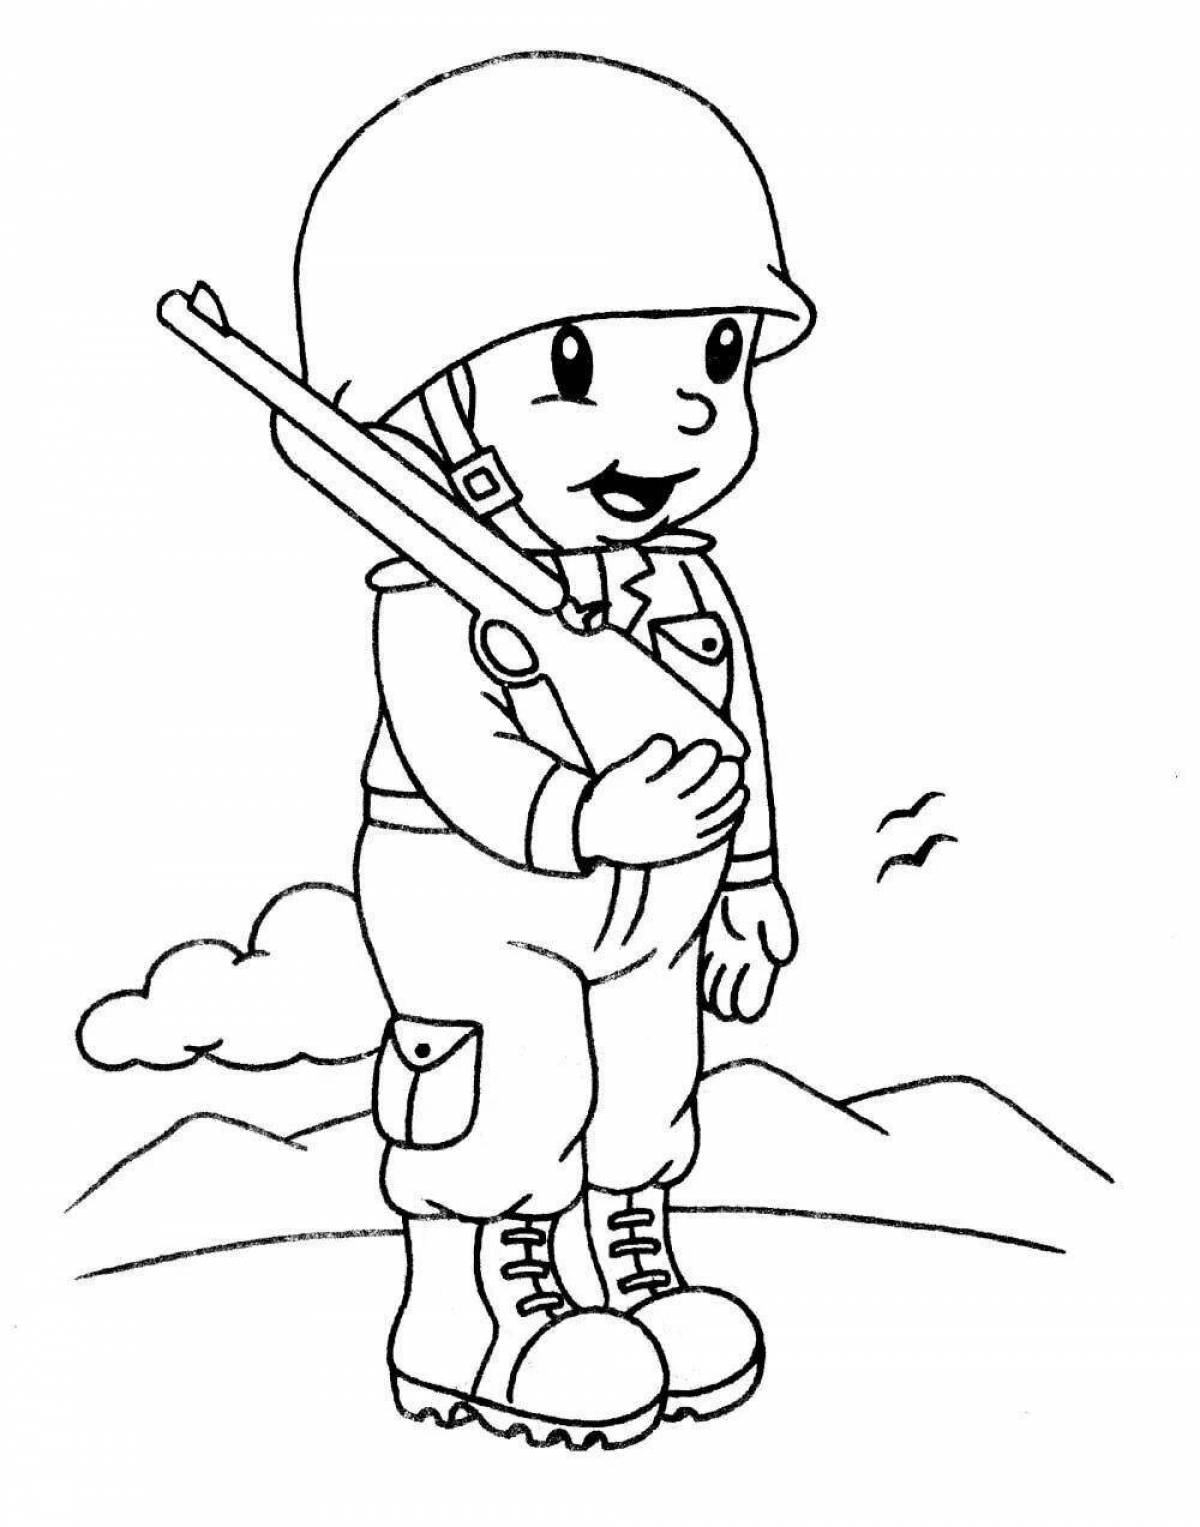 Military occupations for preschoolers #10